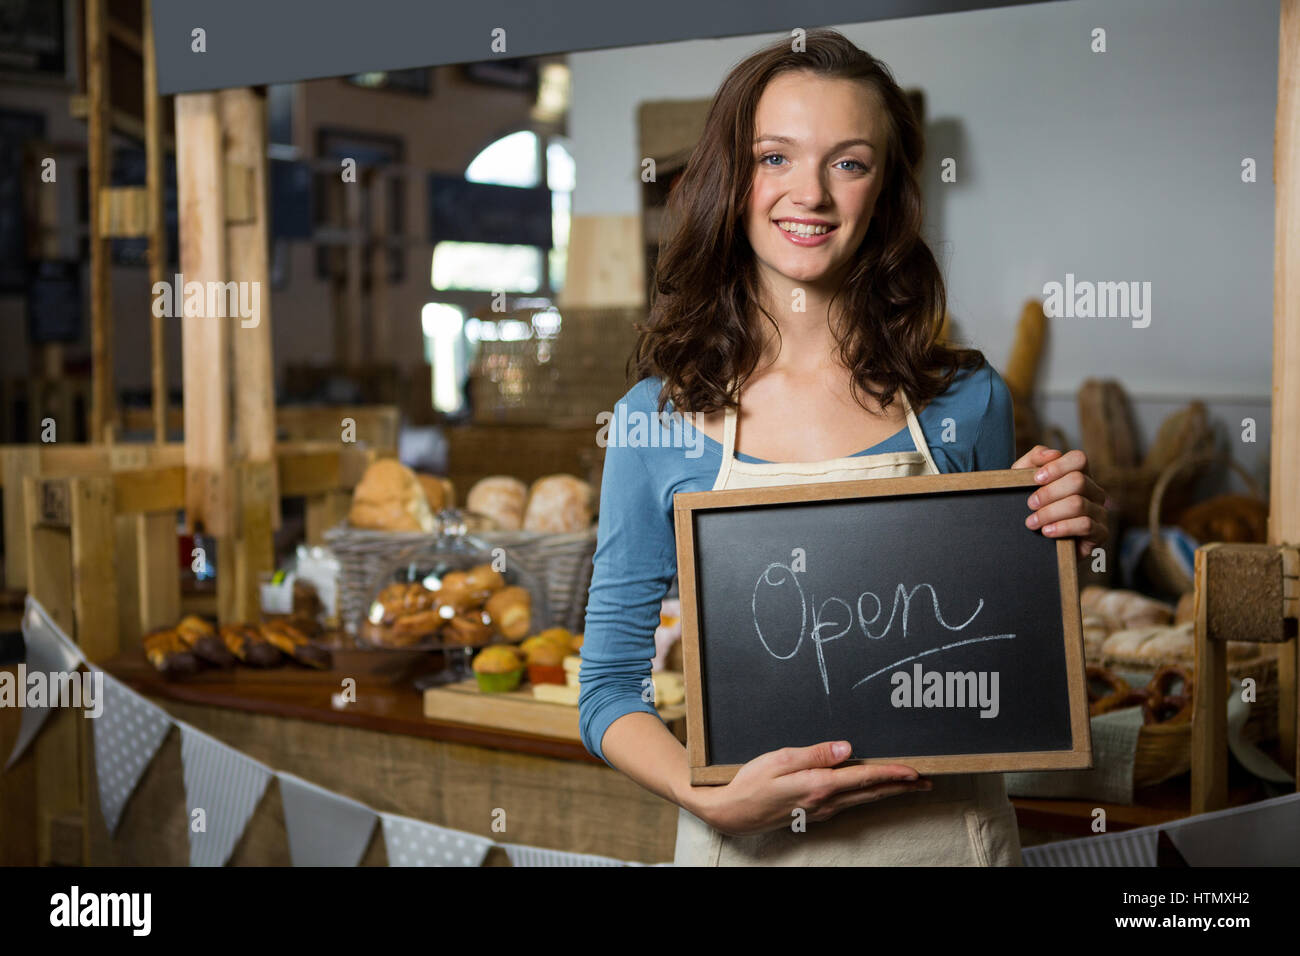 Portrait of a female staff holding a open sign in supermarket Stock Photo